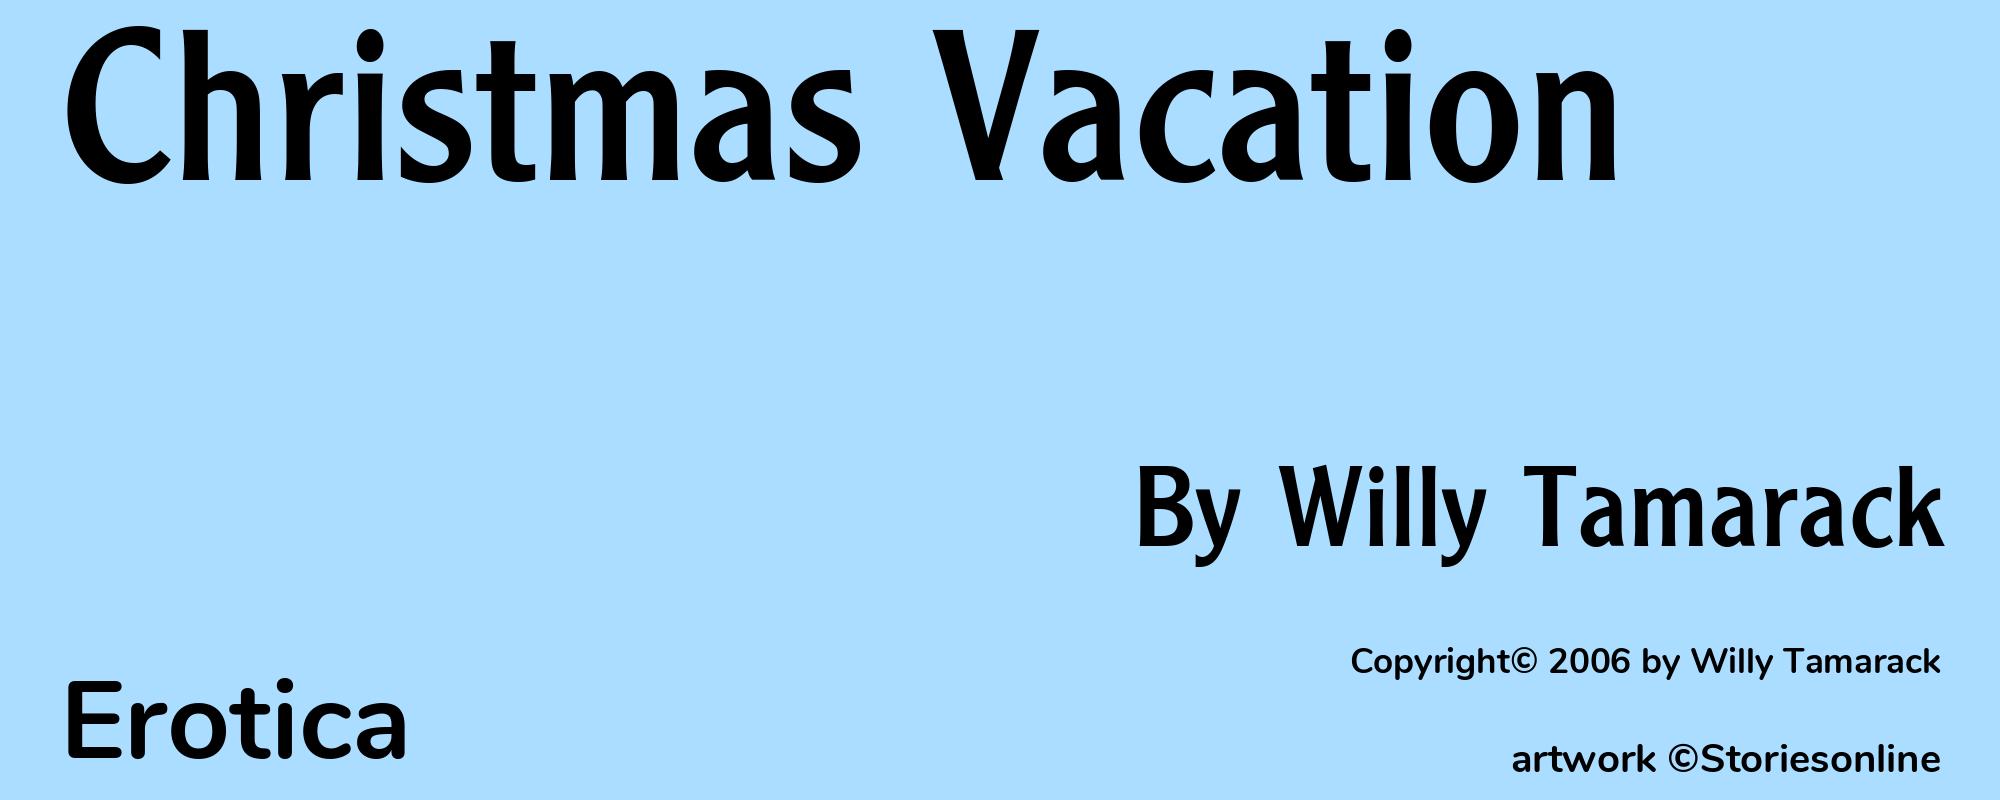 Christmas Vacation - Cover